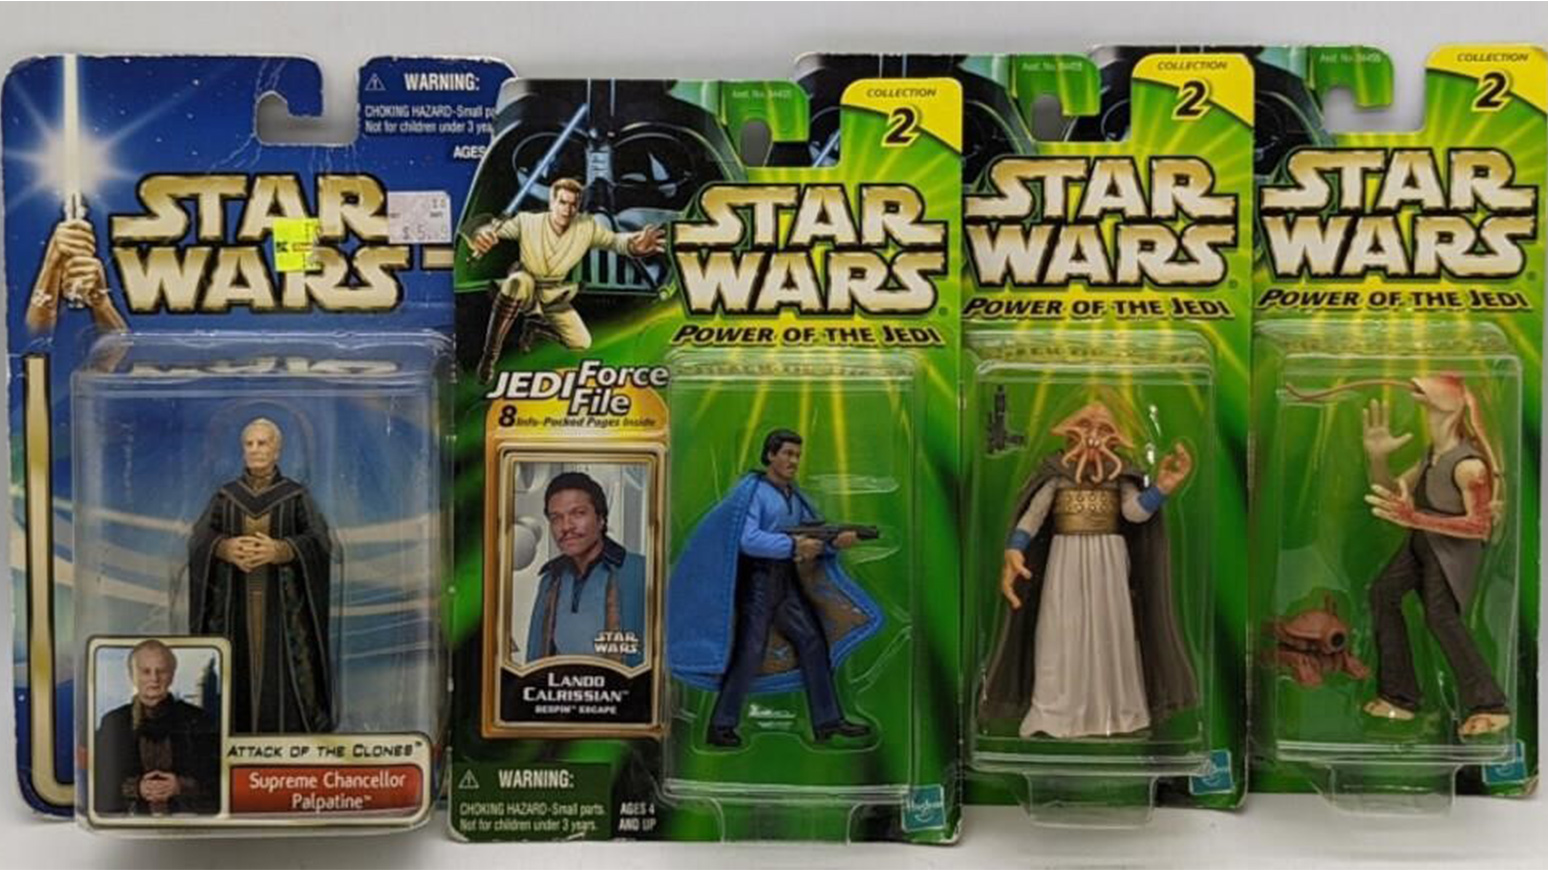 Buy & Sell ‘Star Wars’ Collectibles On HiBid.com